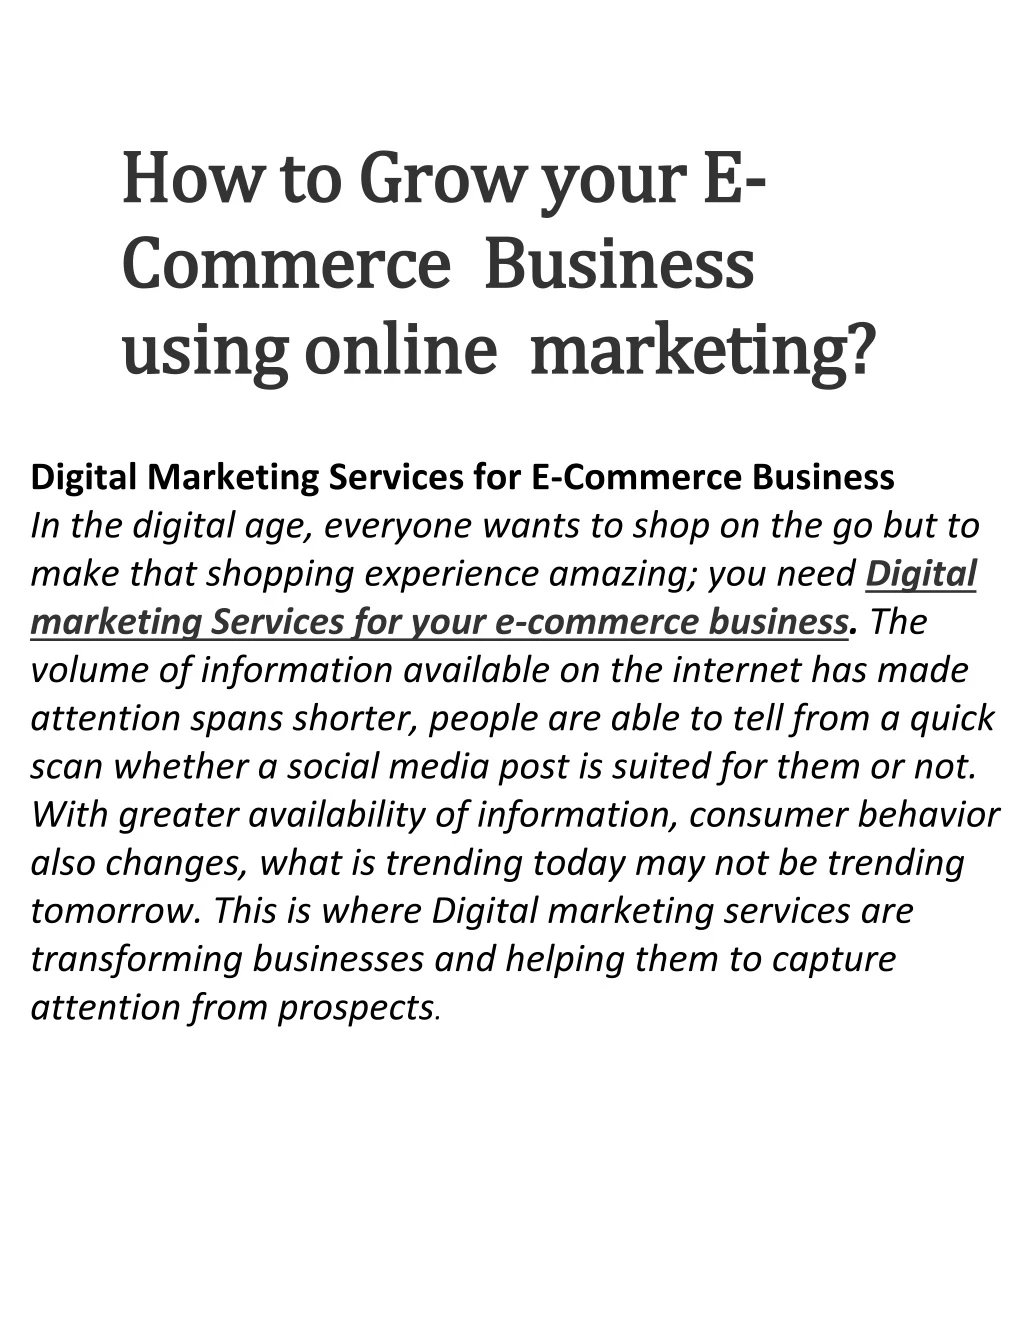 how to grow your e commerce business using online marketing